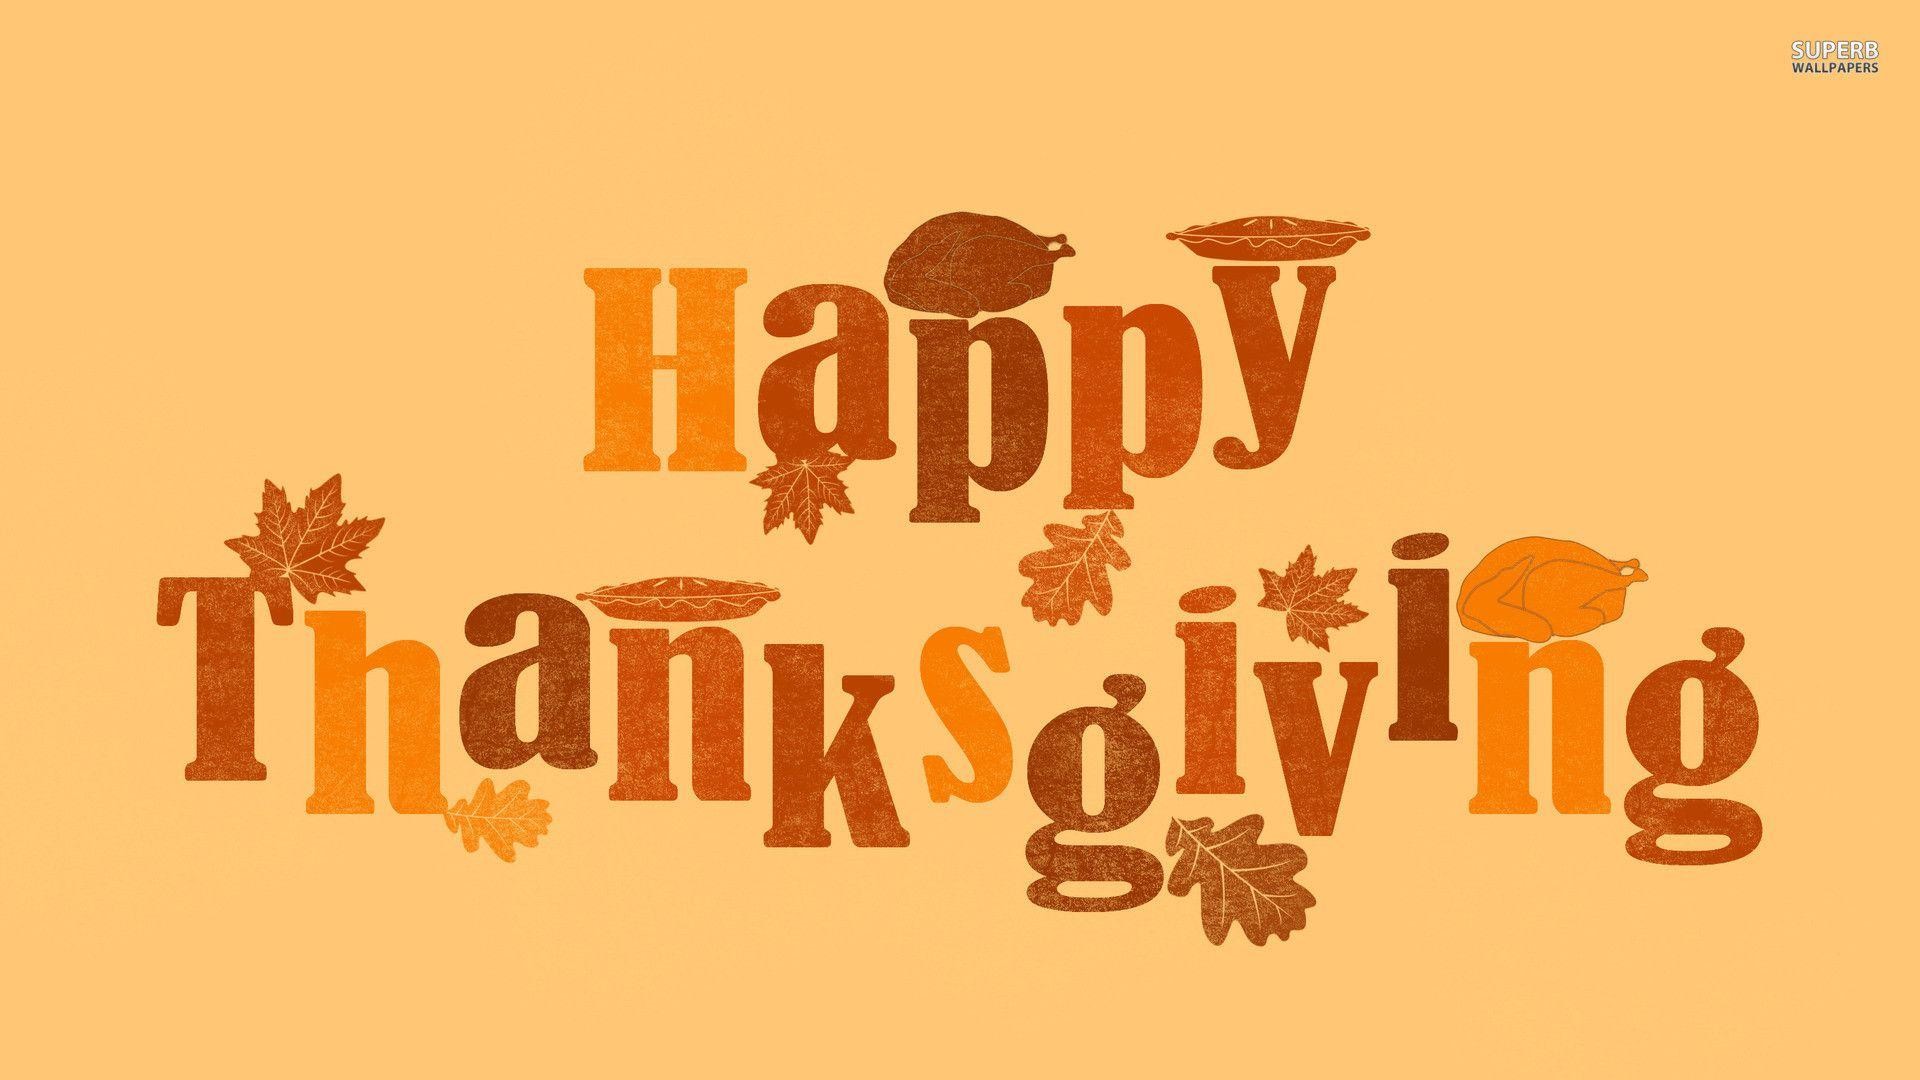 1920x1080 Happy Thanksgiving wallpaper - Holiday wallpapers - #